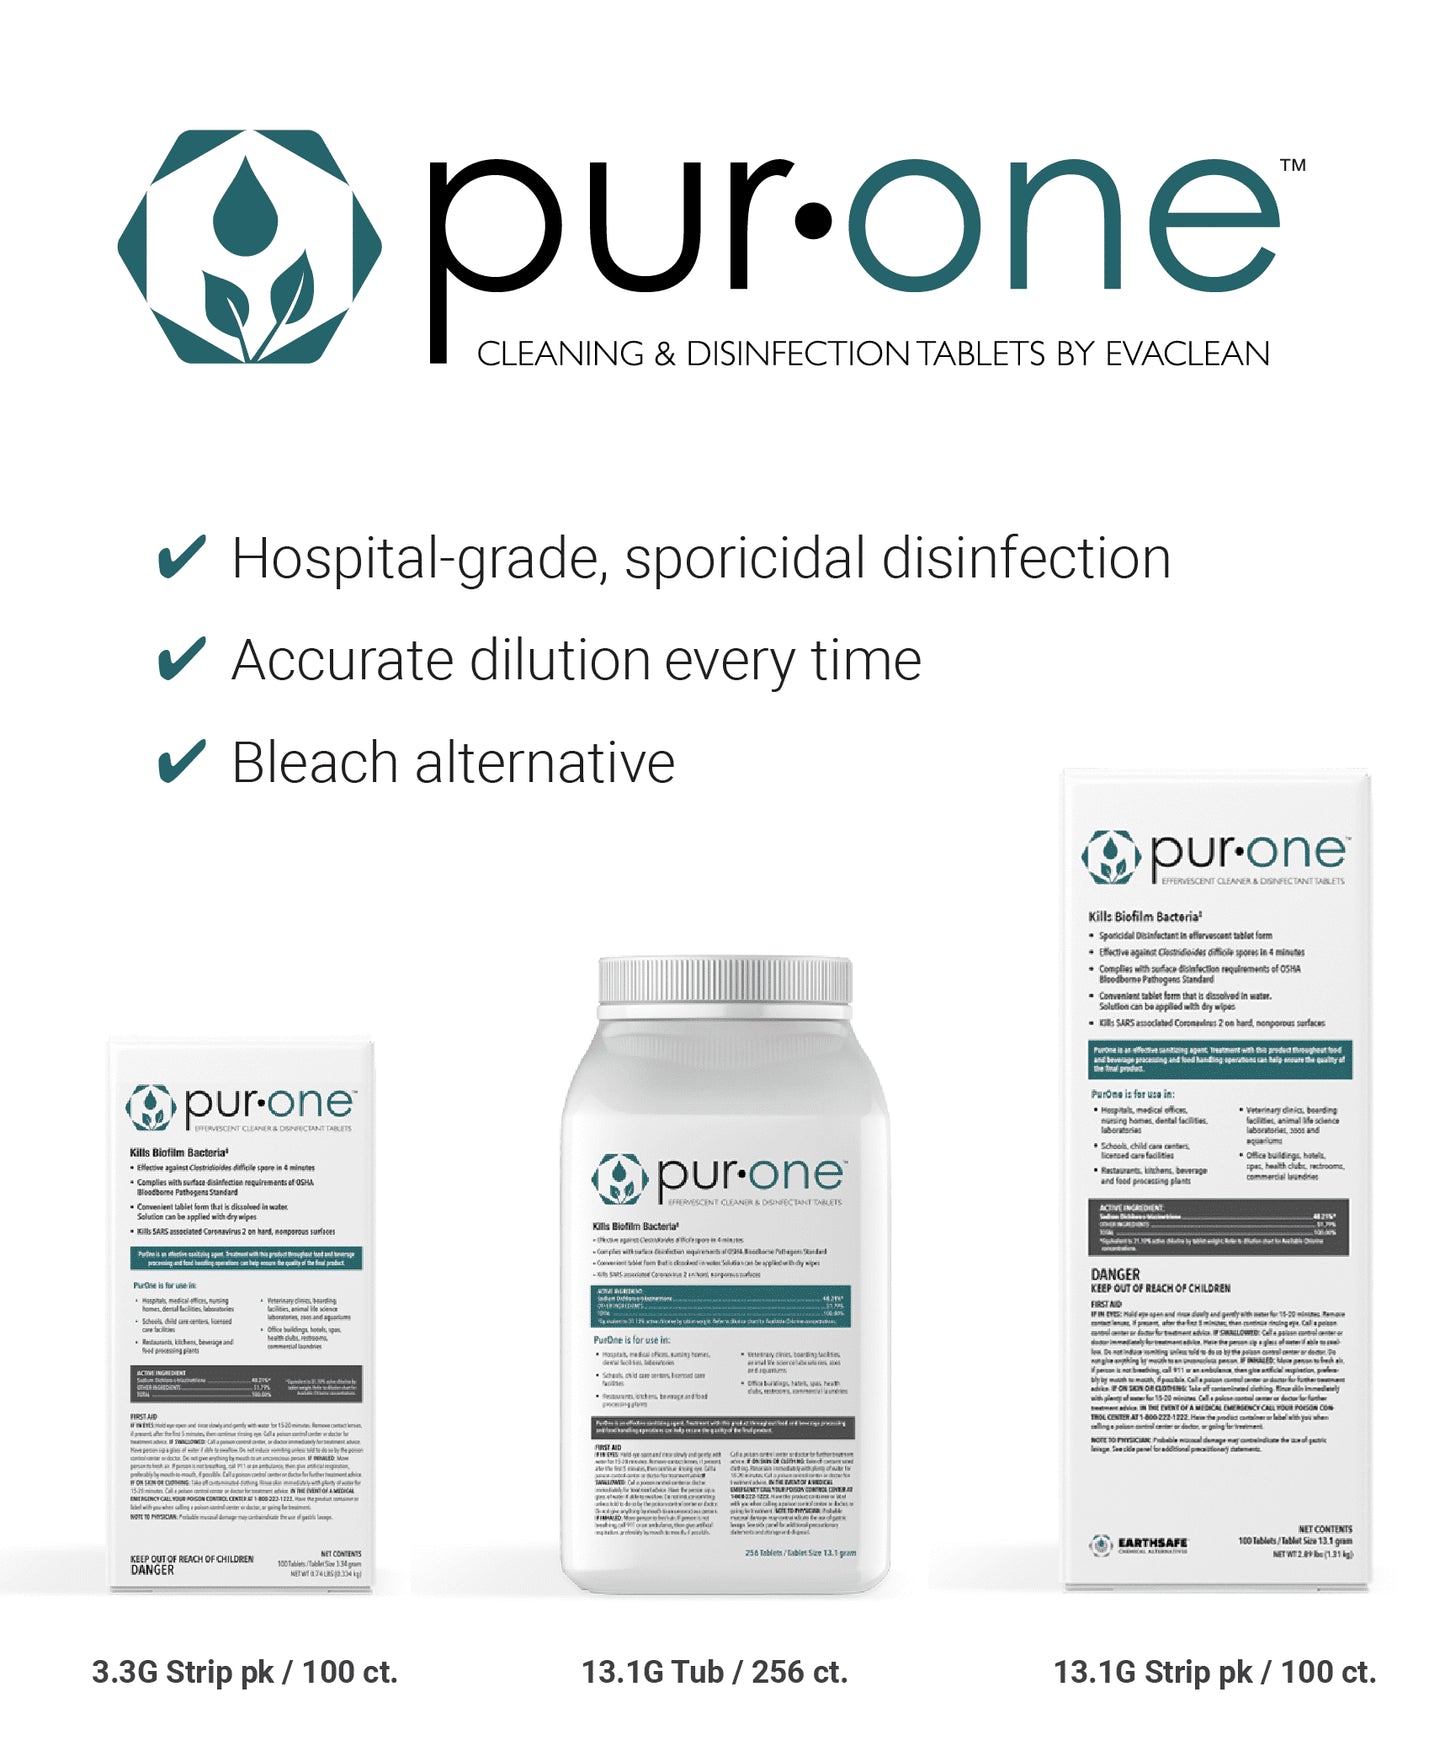 PurOne Multipurpose Cleaning & Disinfection Tablets – 3.3 Gram Strip Pack